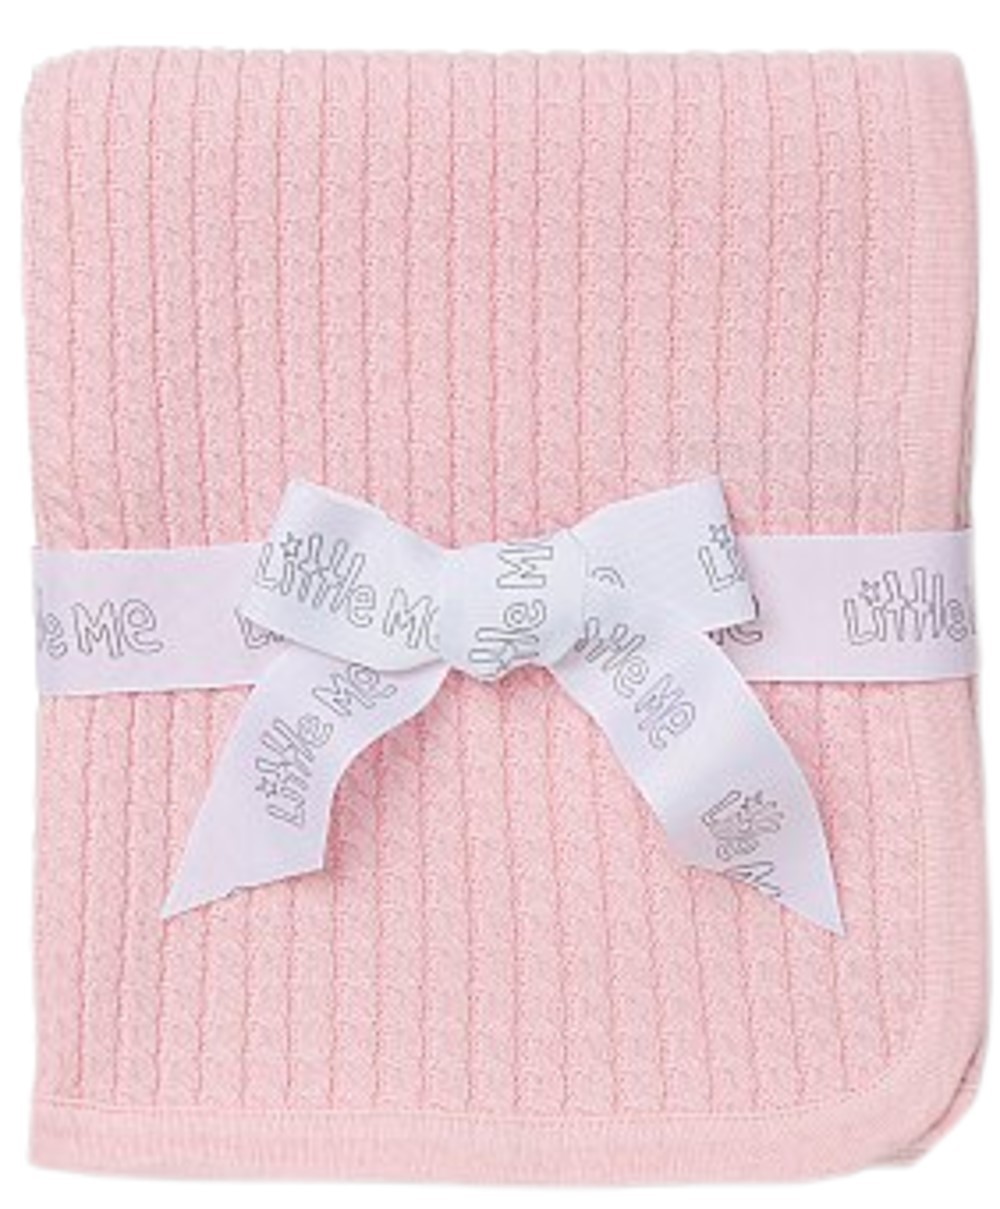 LITTLE ME BABY GIRLS PINK CABLE KNIT BLANKET